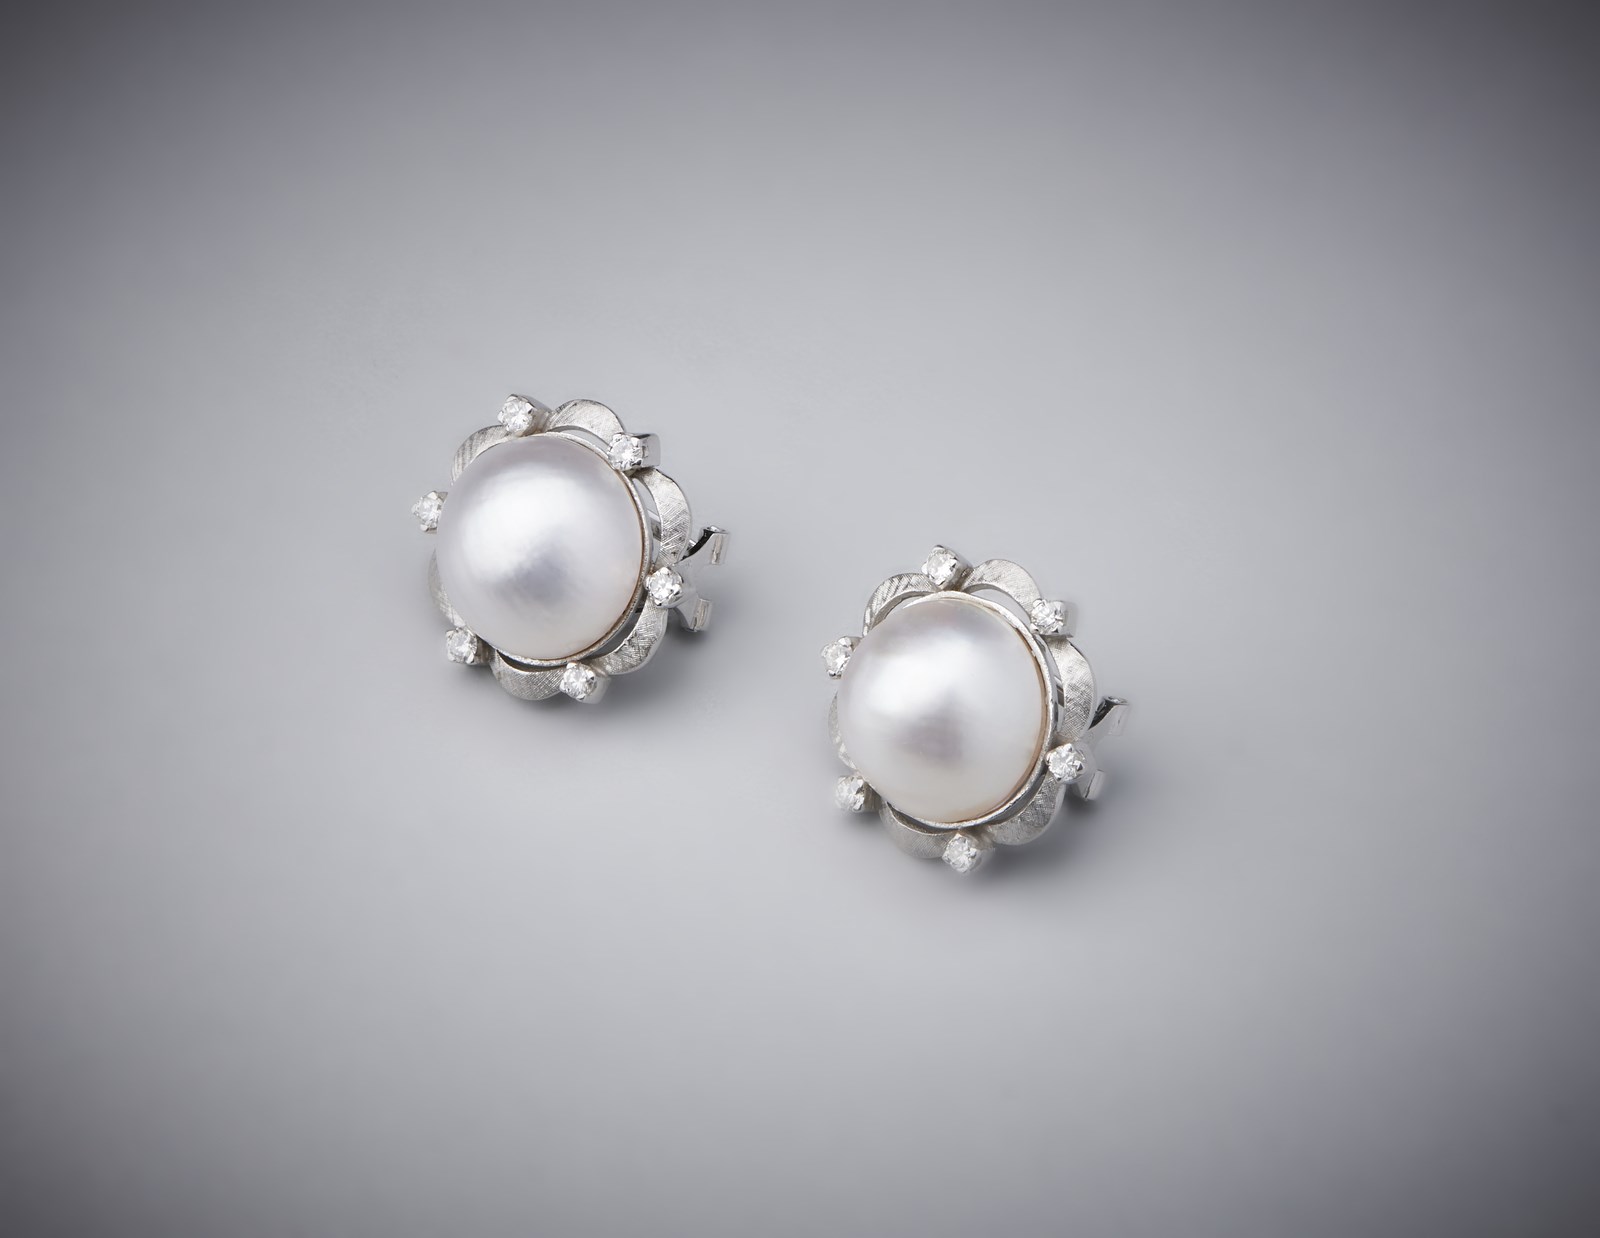 Handmade earrings in 750/1000 white gold with mabé pearls and white diamonds. (. )